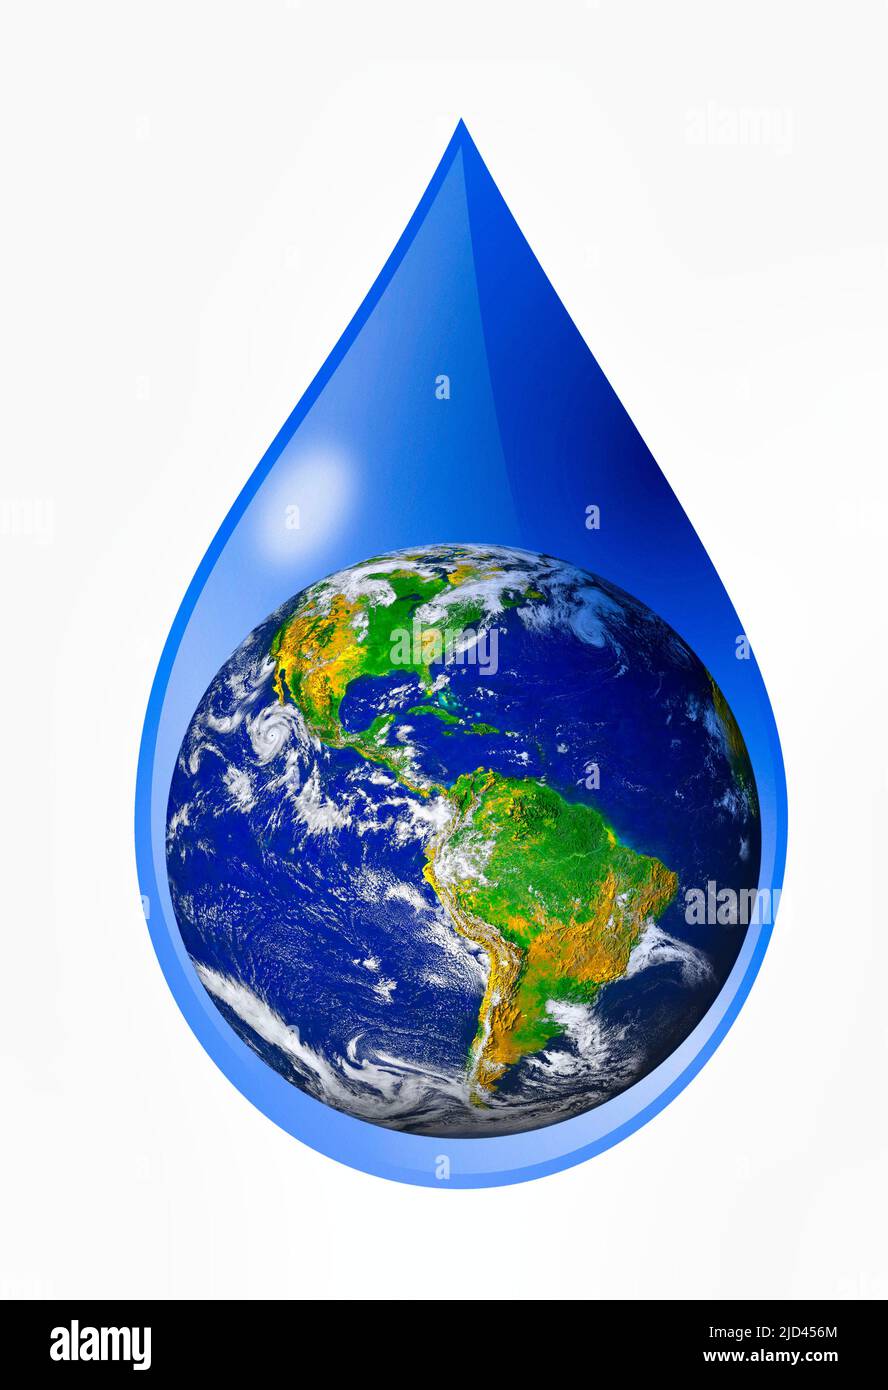 Earth in a water droplet, illustration Stock Photo